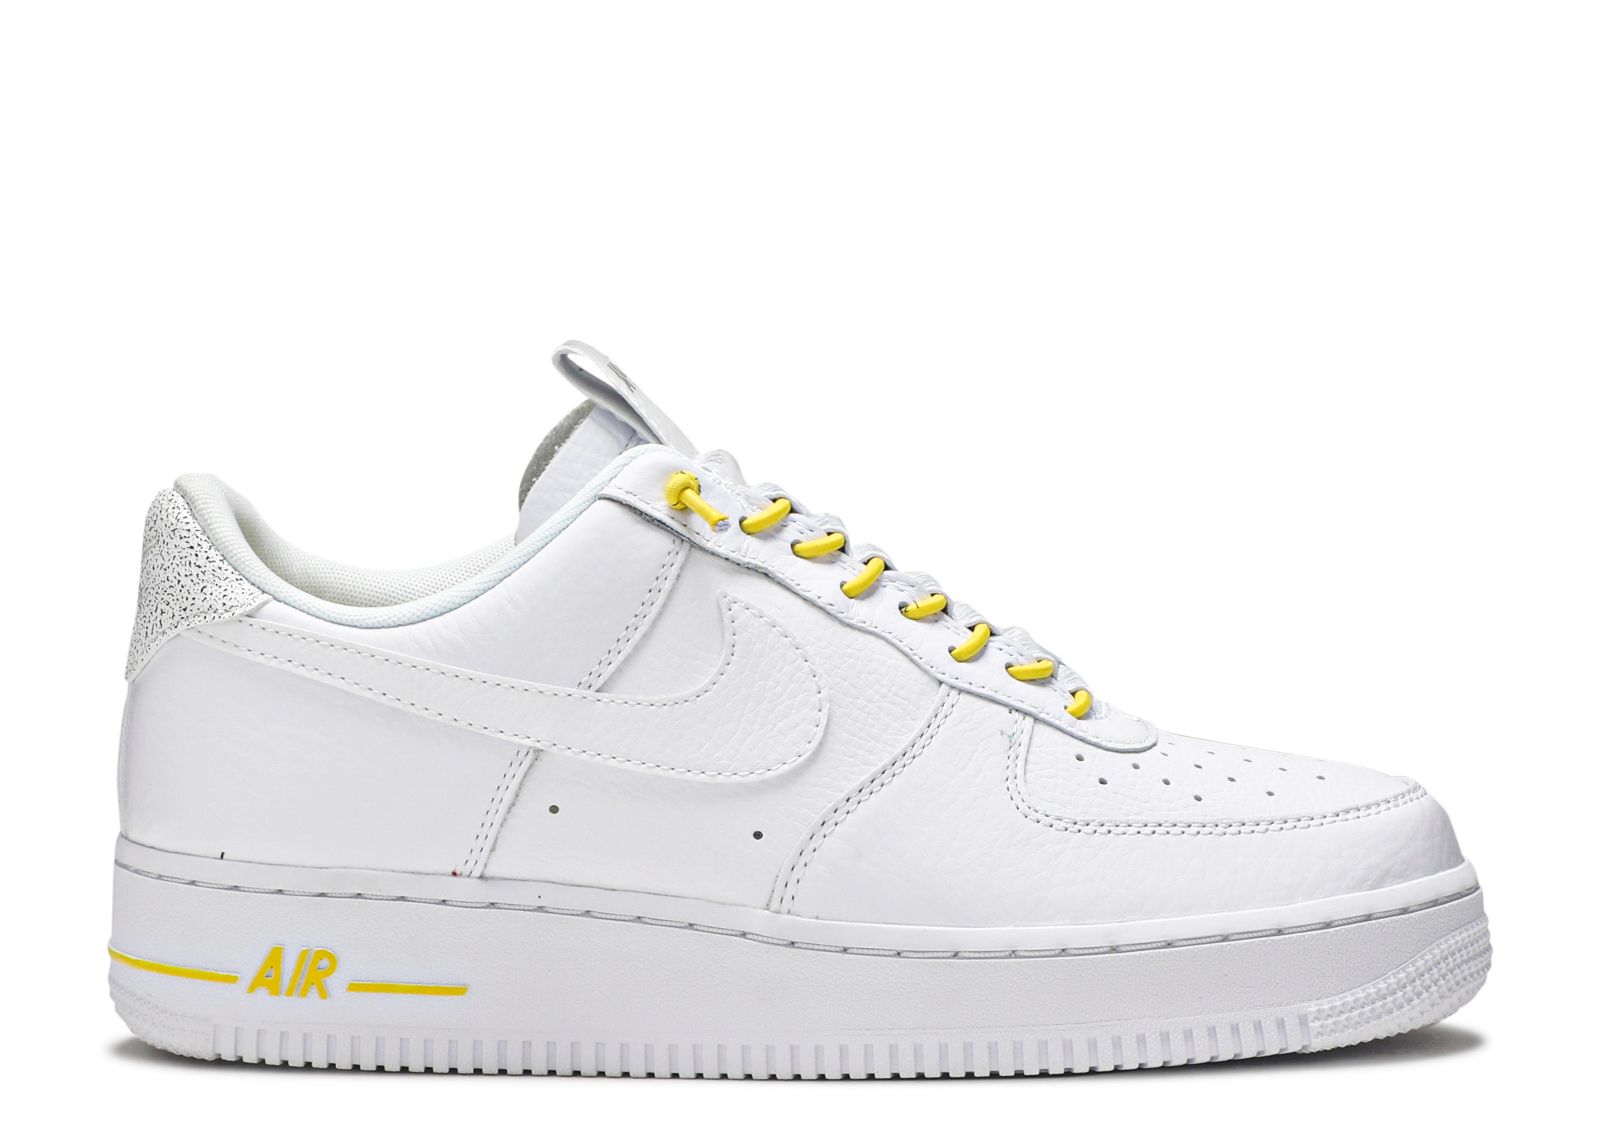 Wmns Air Force 1 '07 Lux 'White Reflective'